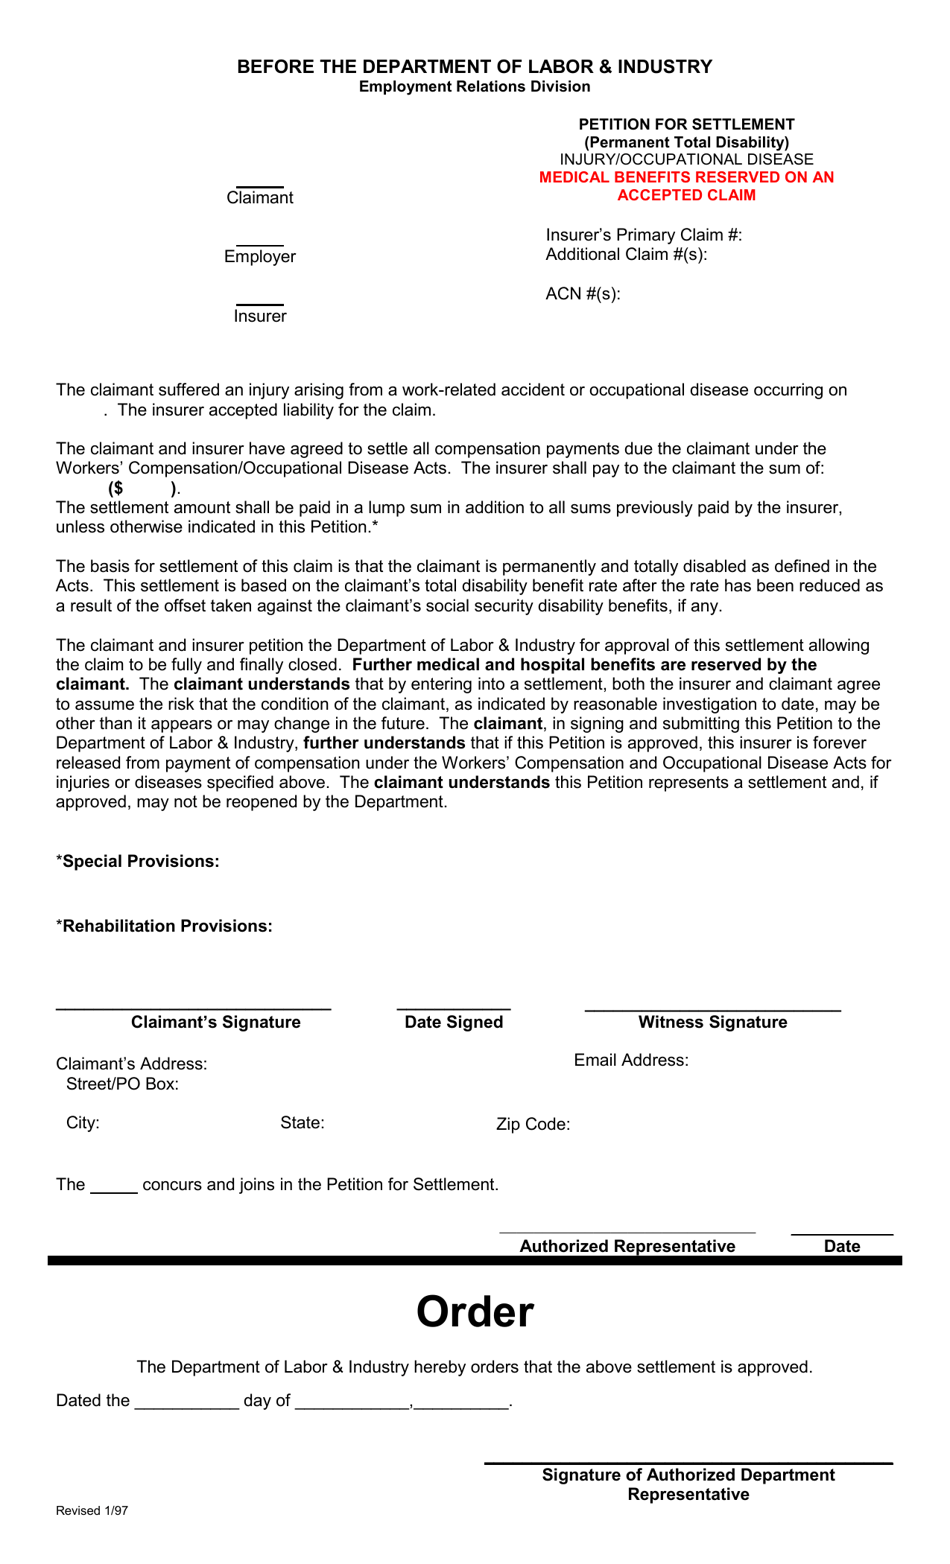 Petition for Settlement - Ptd, Injury / Od Medical Benefits Reserved on an Accepted Claim - Montana, Page 1